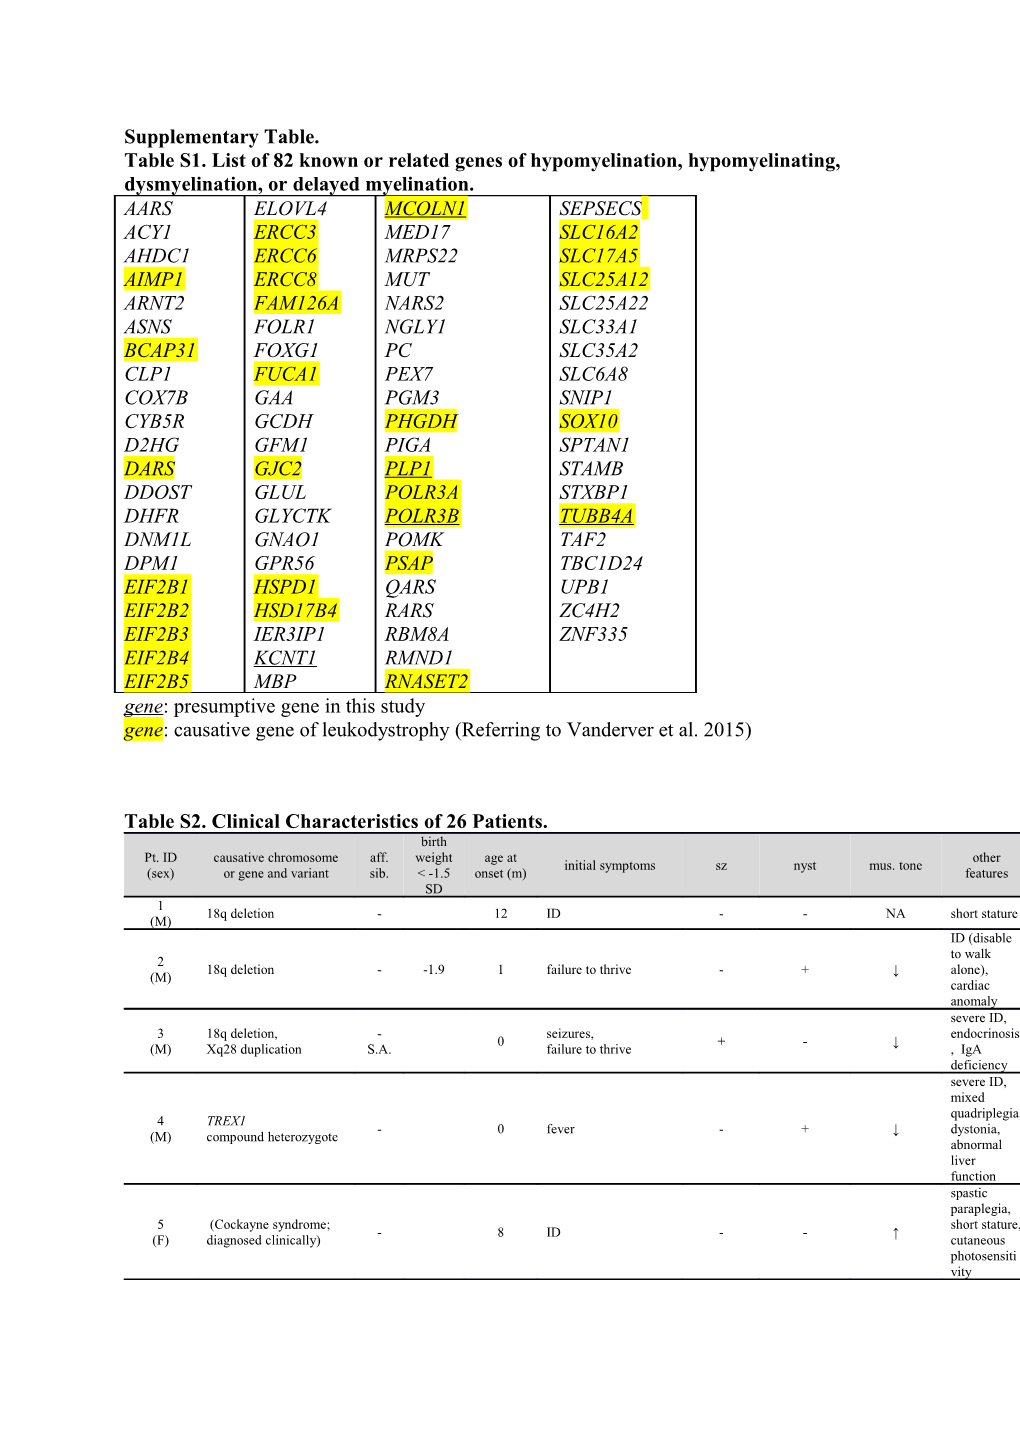 Table S1. List of 82 Known Or Related Genesof Hypomyelination, Hypomyelinating, Dysmyelination